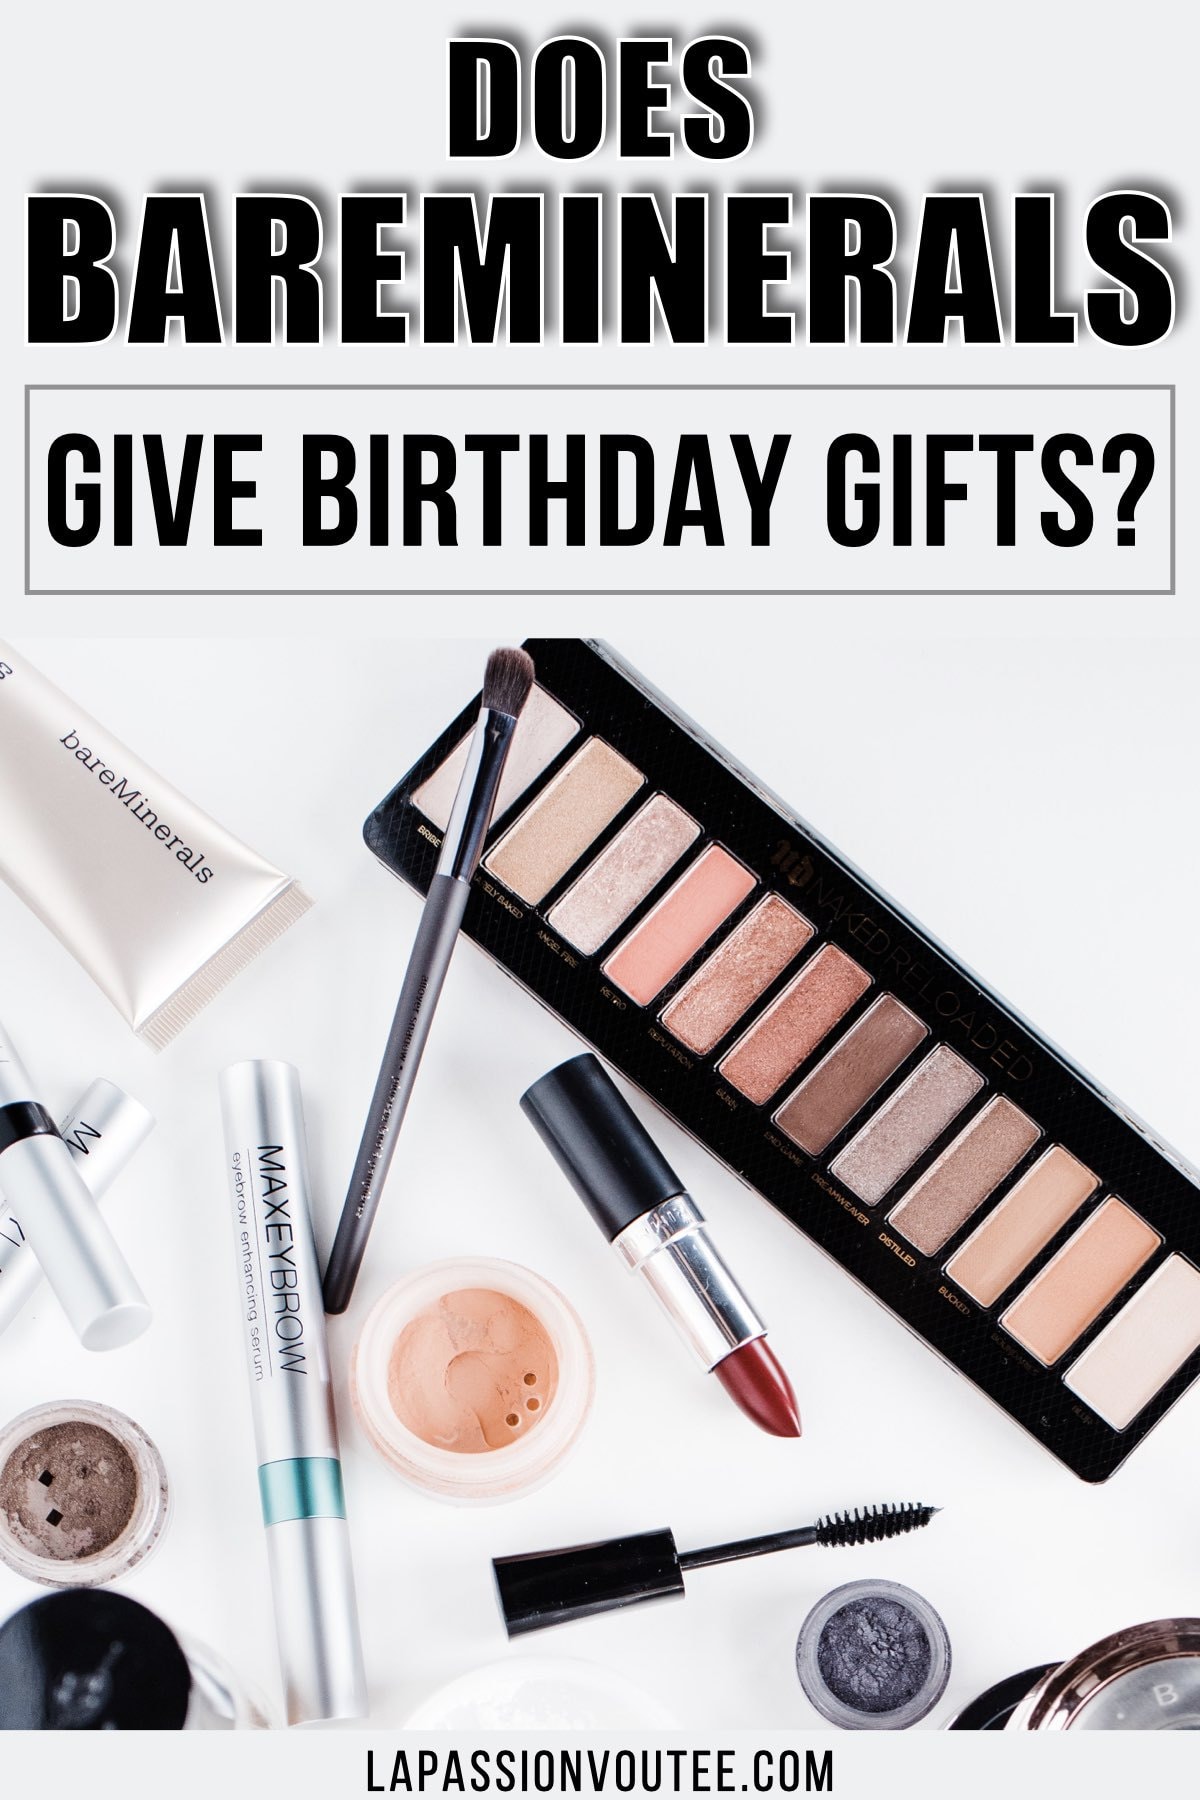 Does bareMinerals give birthday gifts